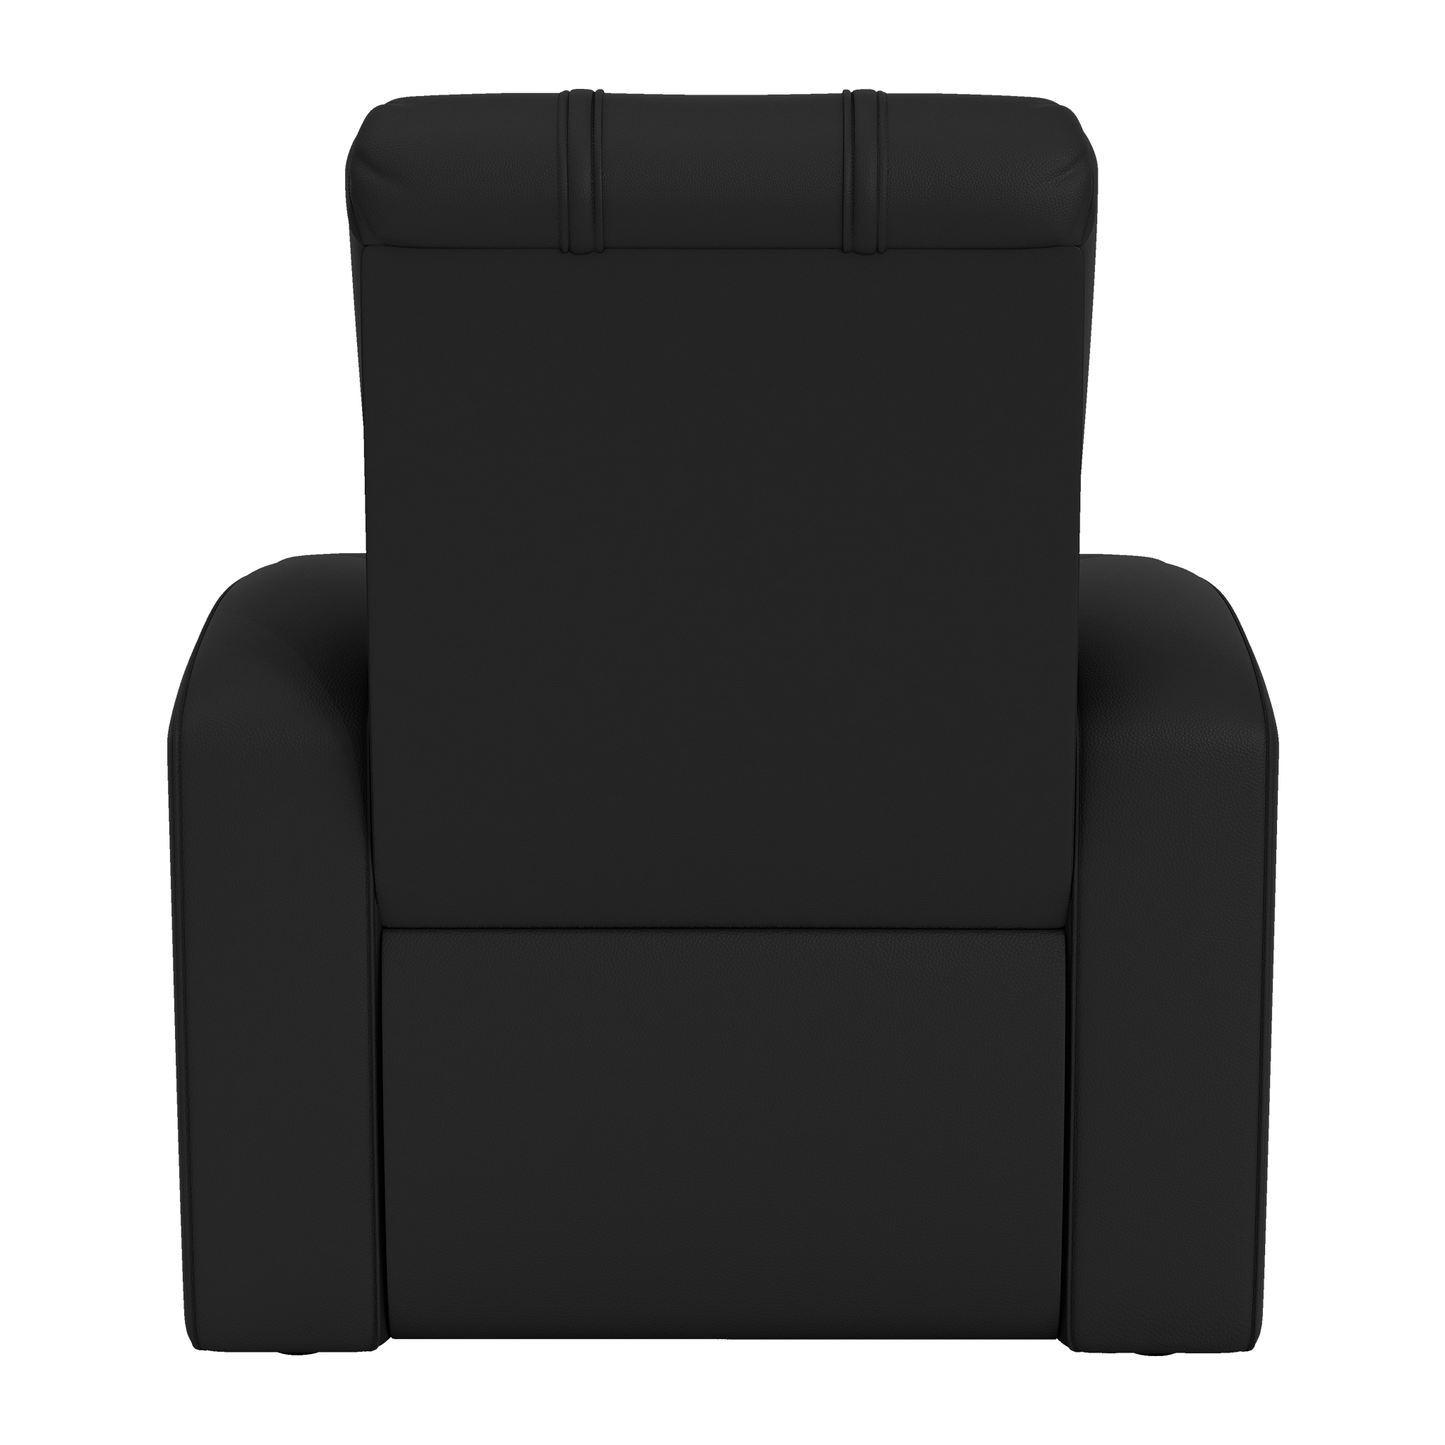 Relax Home Theater Recliner with Rutgers Scarlet Knights Head Logo